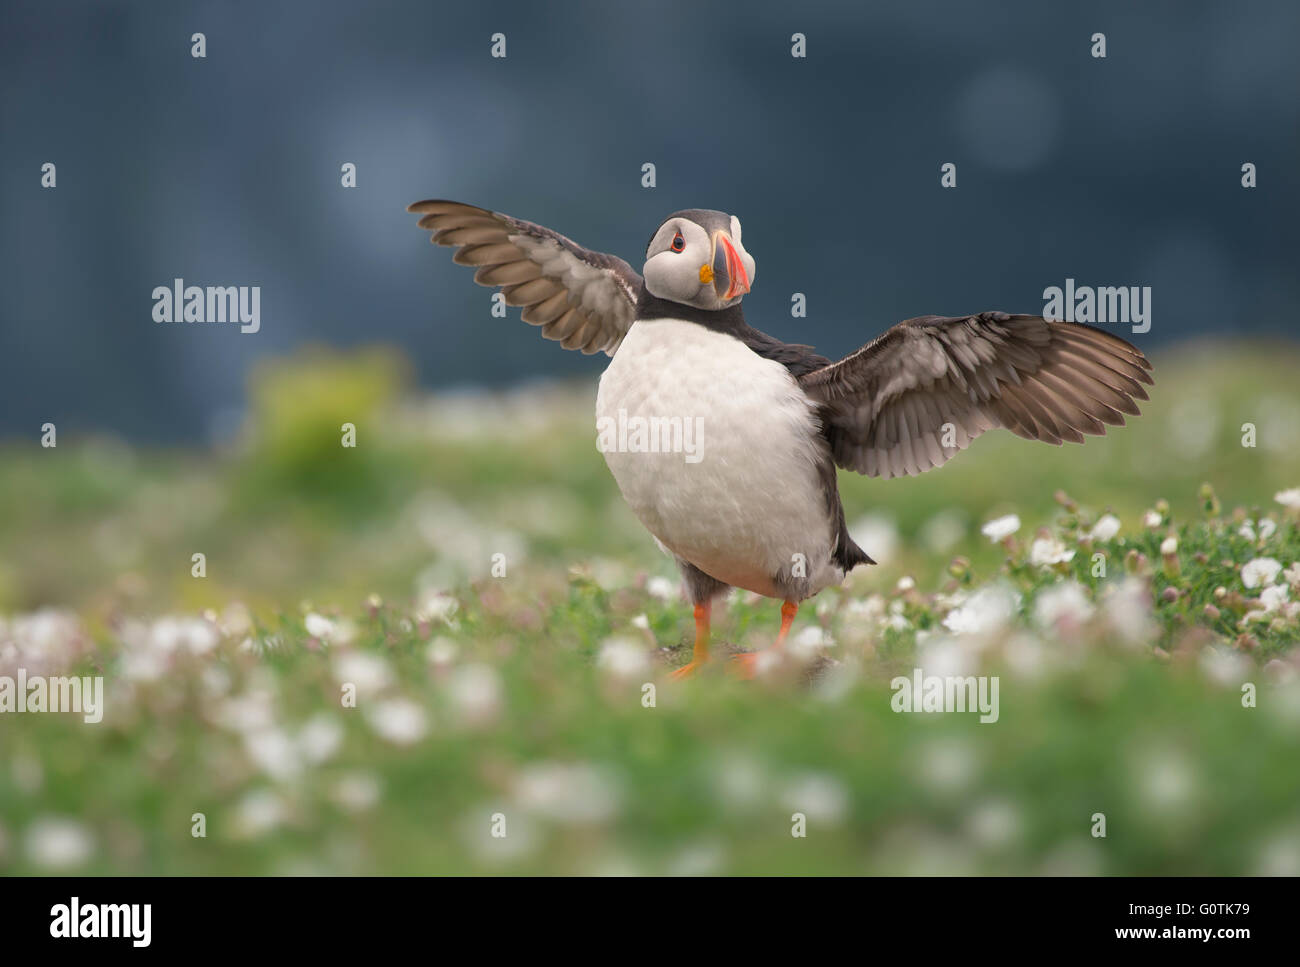 Puffin bird (fratercula arctica) with spread wings, Skomer, Pembrokeshire, Wales, UK Stock Photo